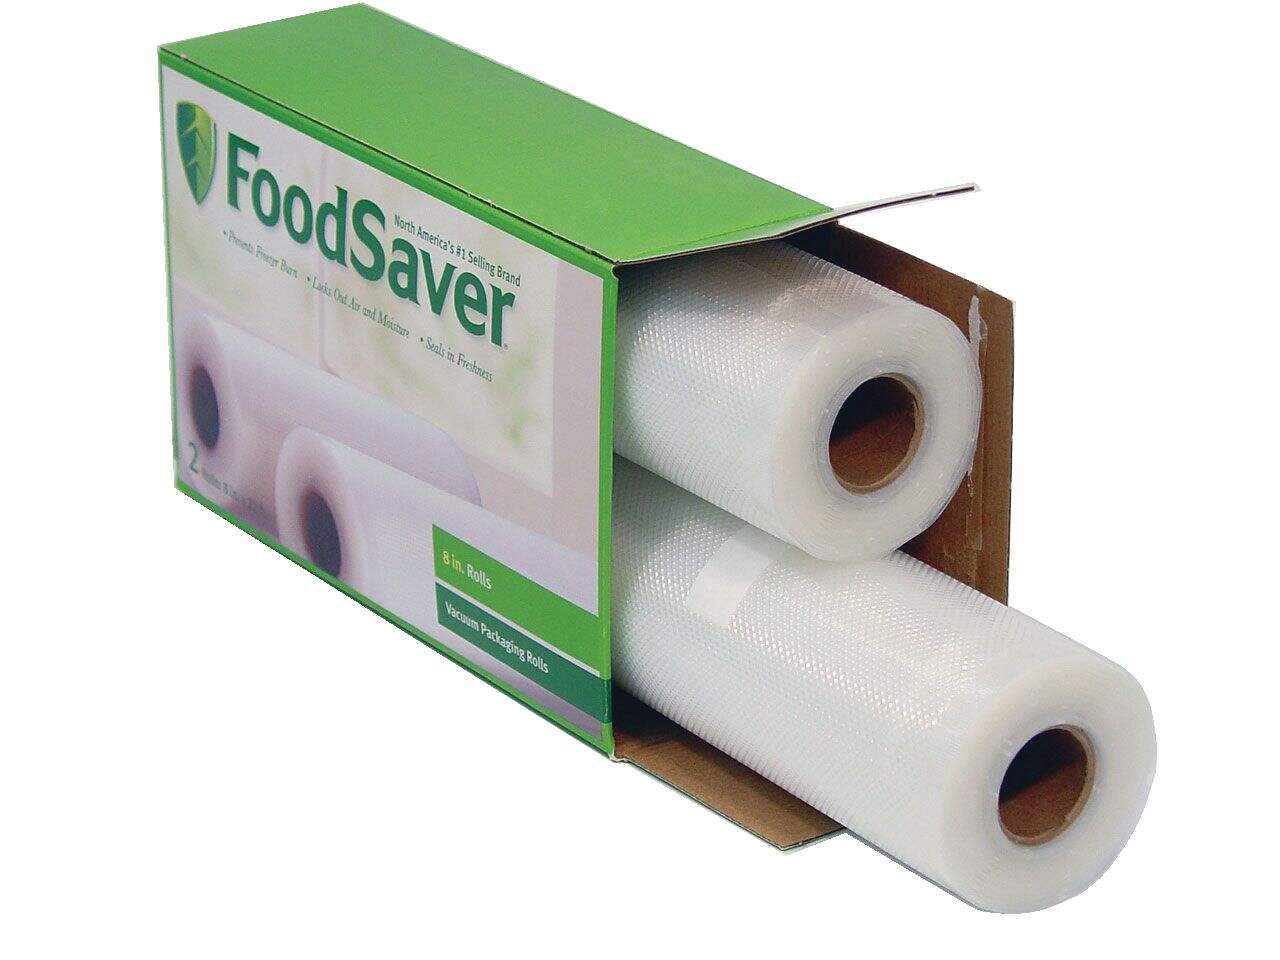 https://media-www.canadiantire.ca/product/living/kitchen/kitchen-appliances/0430622/foodsaver-11-x-16-double-roll-bags-3f75283d-15fd-4474-81b8-7fb7a7ca977e-jpgrendition.jpg?imdensity=1&imwidth=1244&impolicy=mZoom